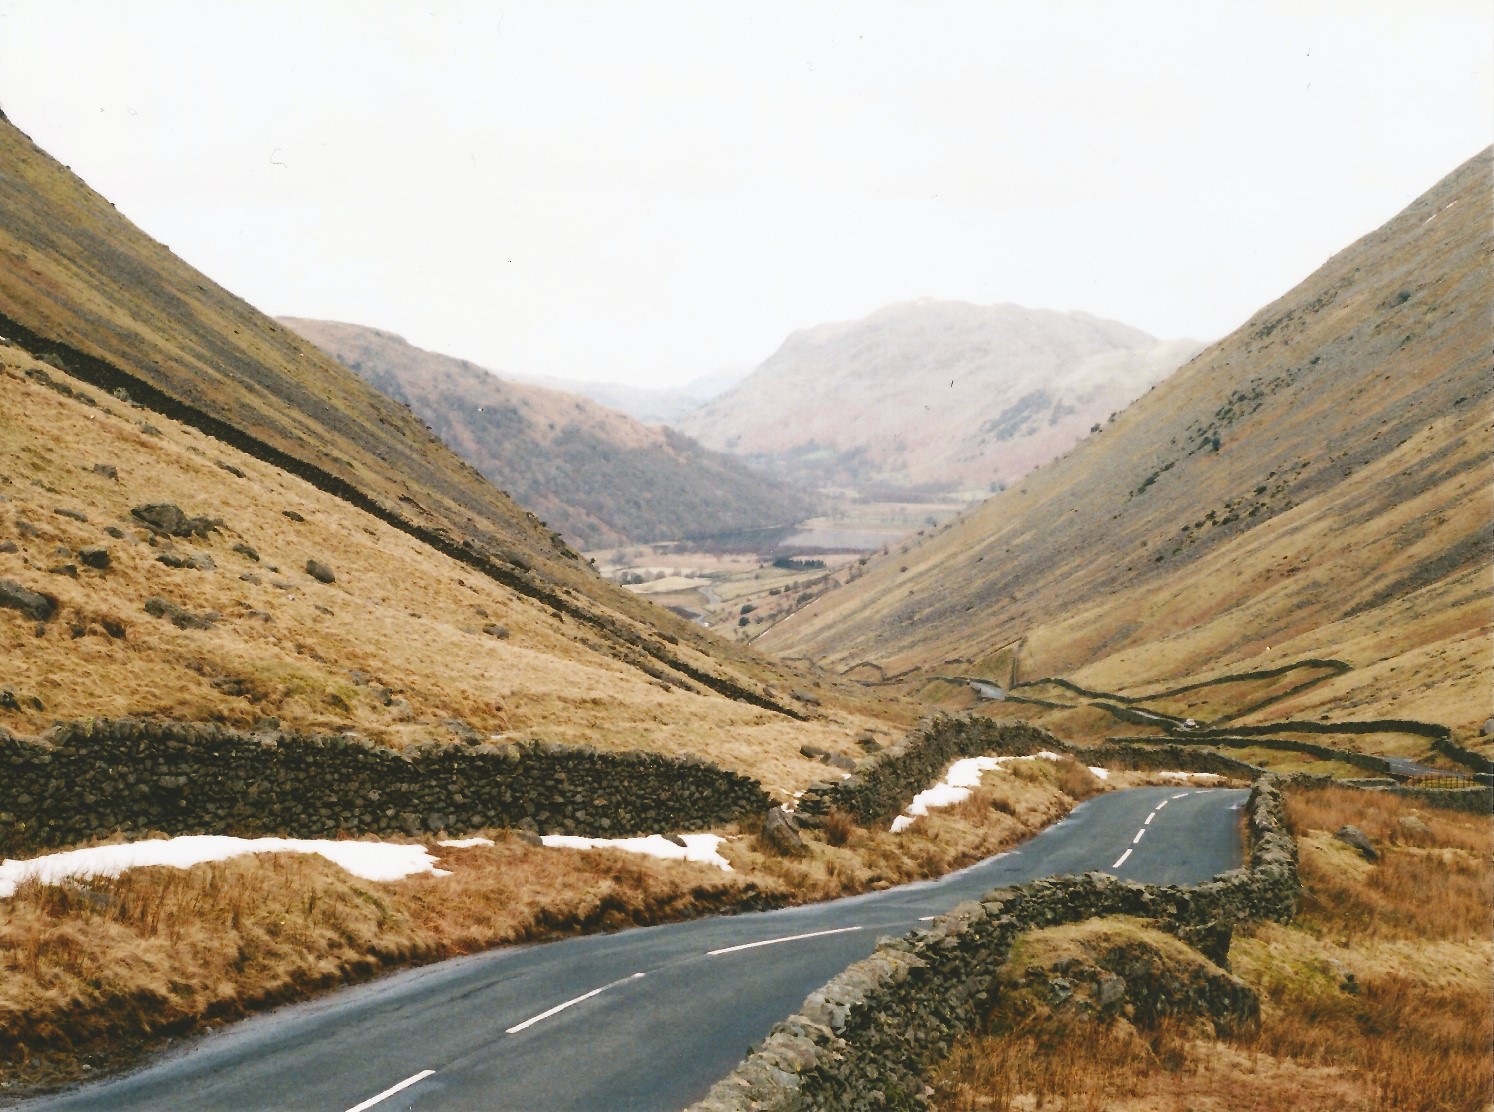 Honister Pass in the Lake District